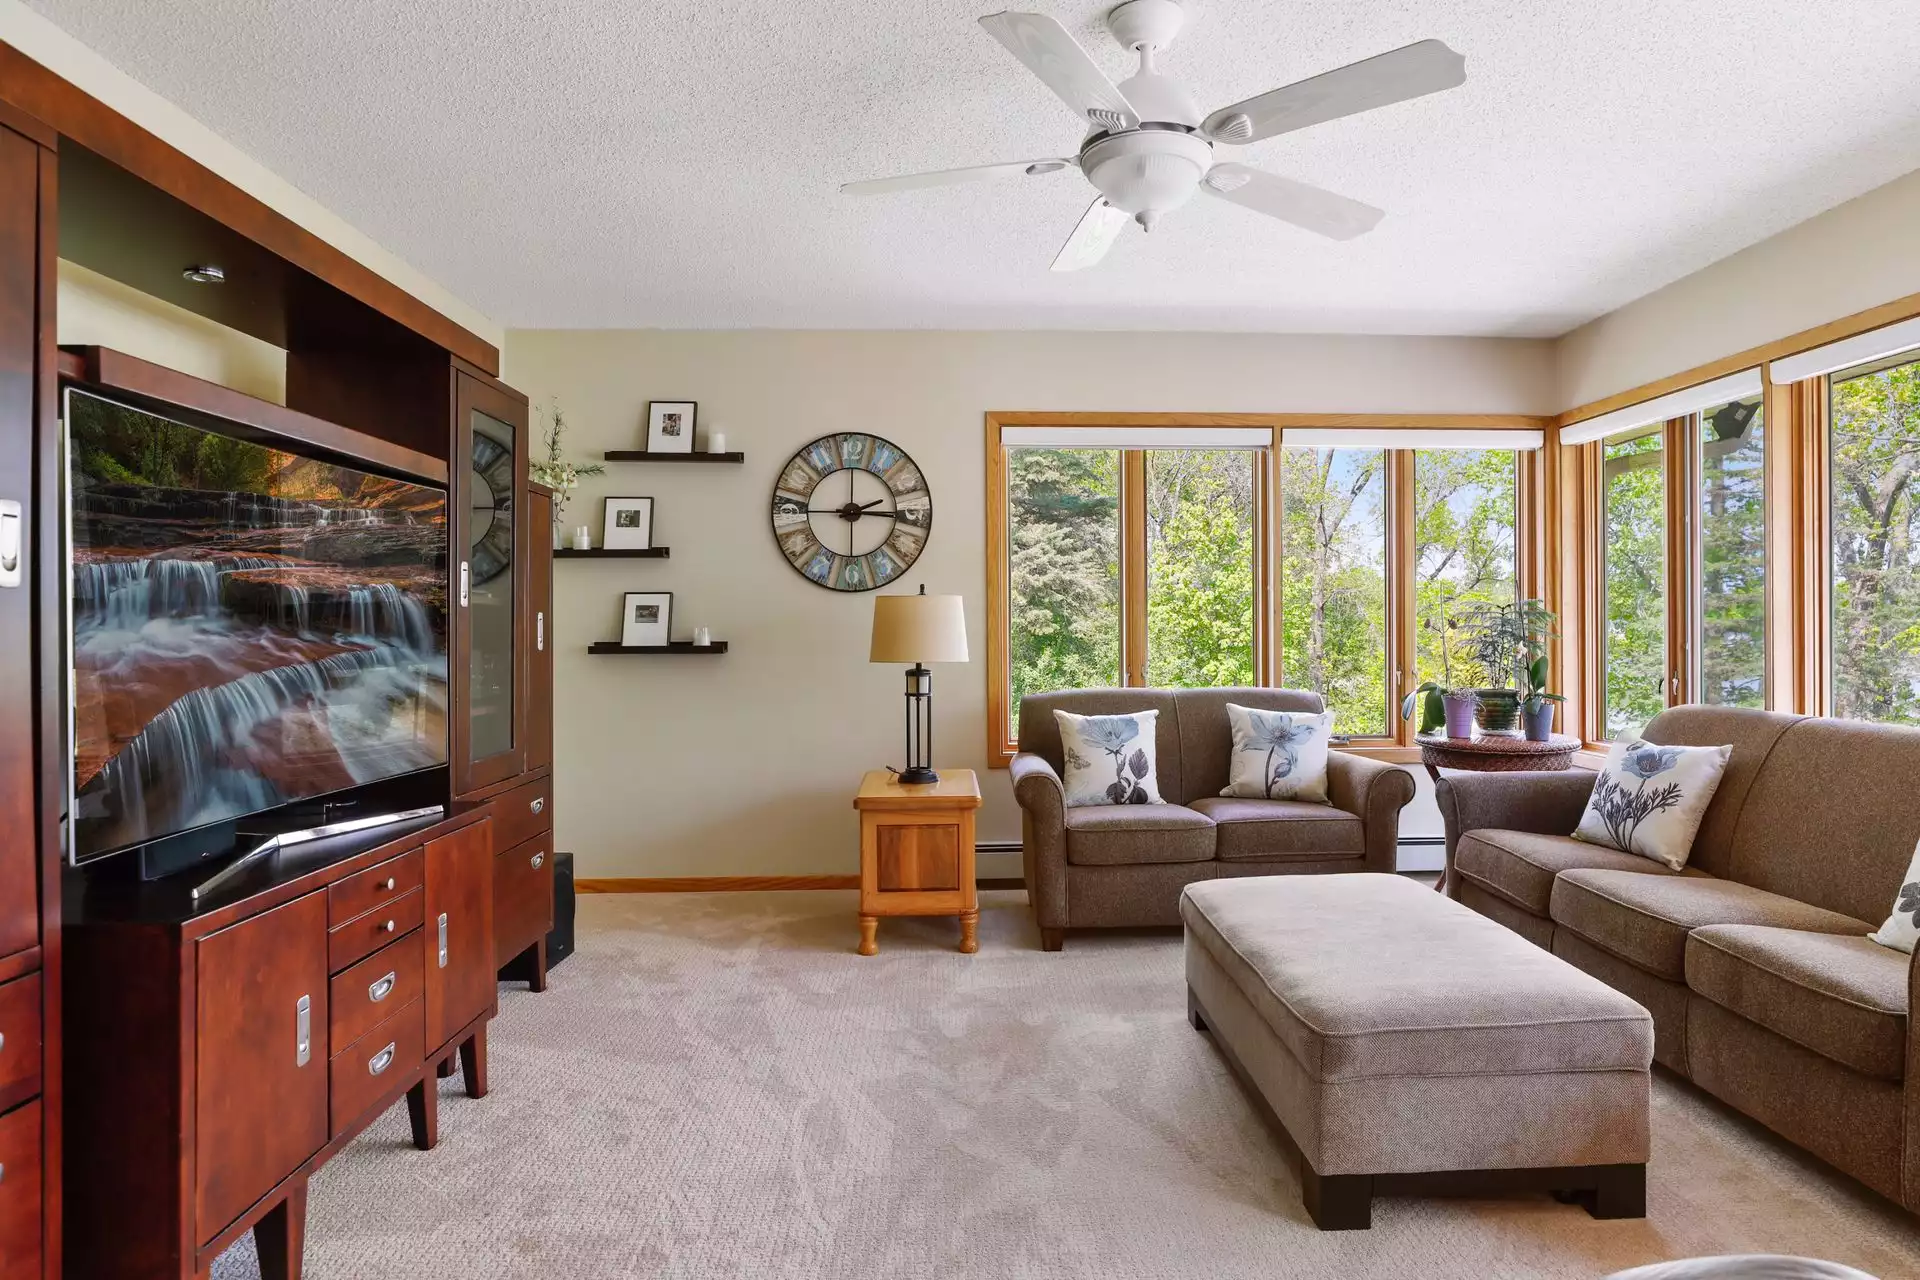 Maplewood Home For Sale Media & Sun Room